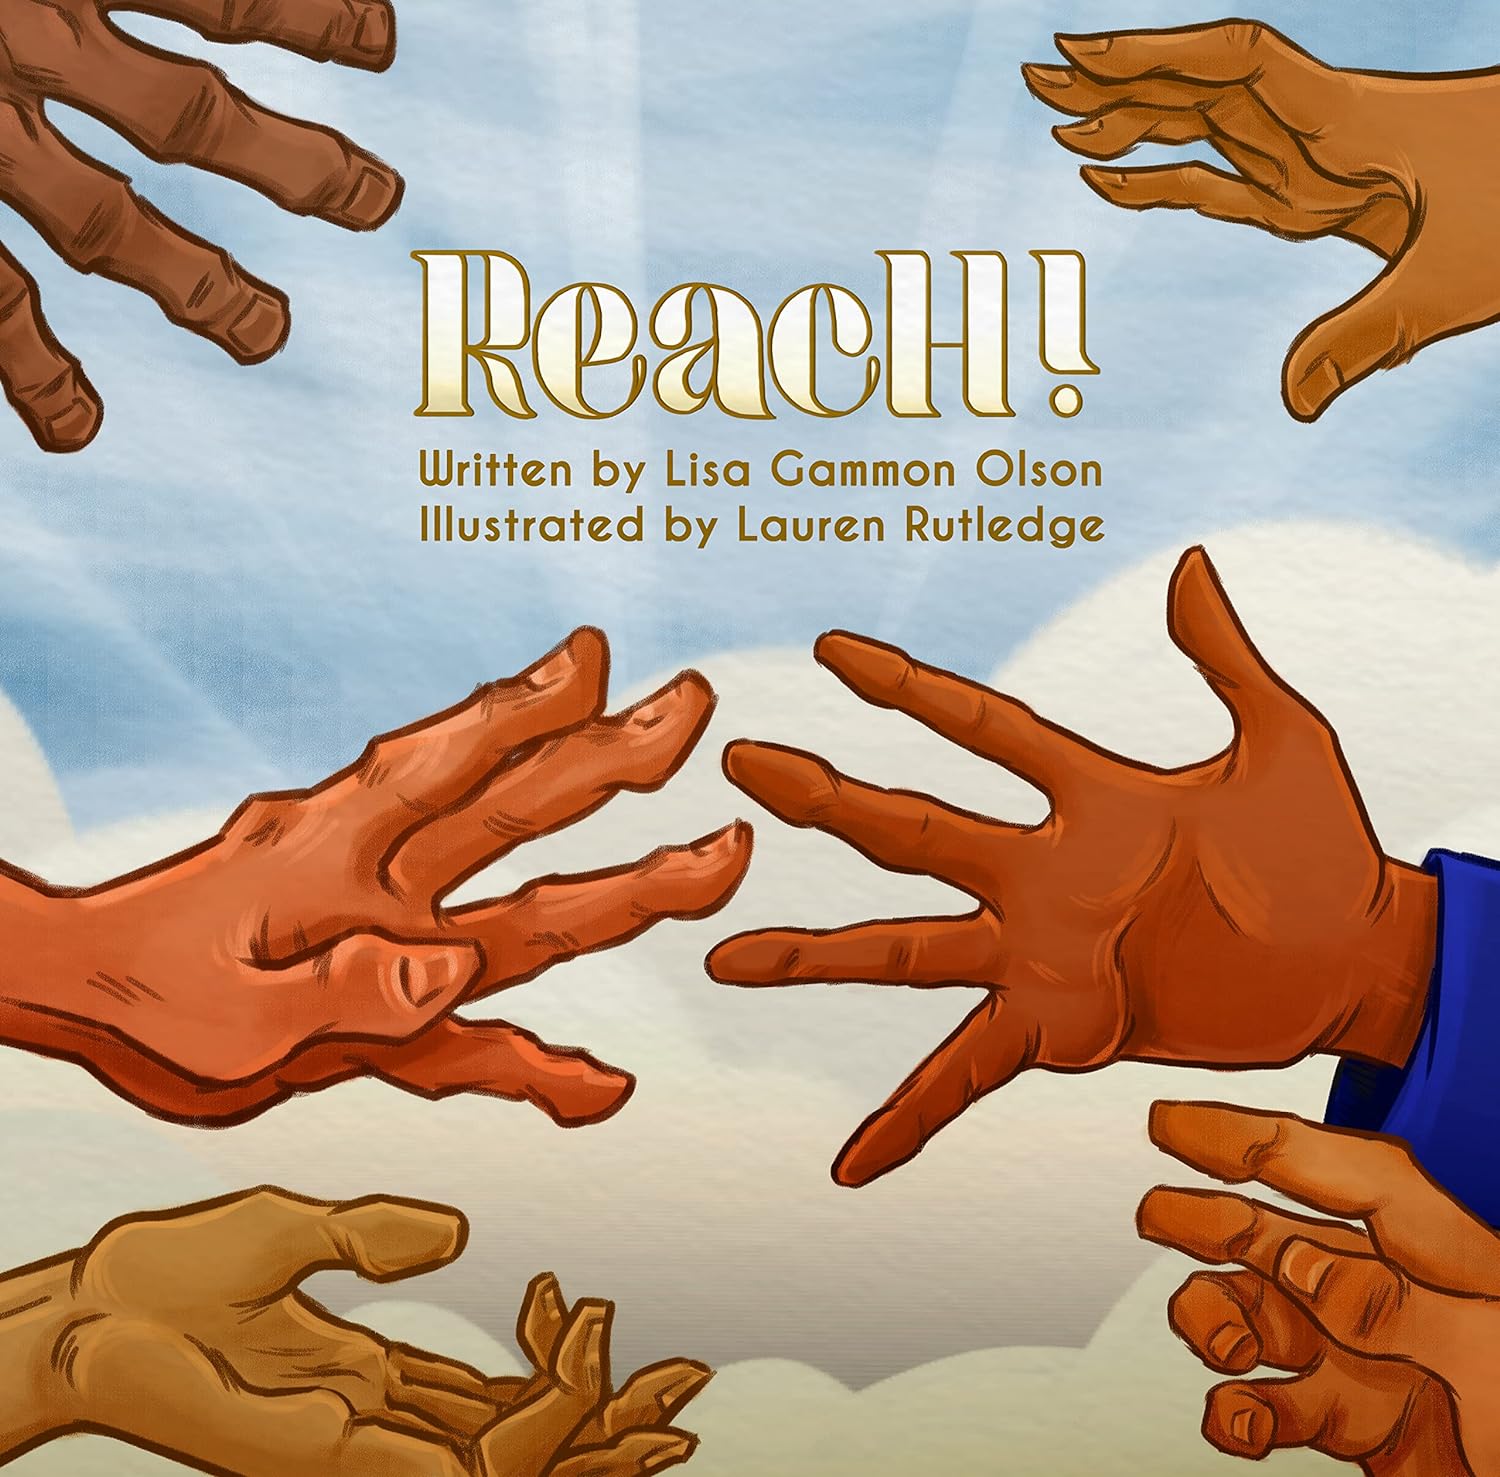 Lisa Gammon Olson Unveils Heartwarming Tale of Unity and Understanding in New Children's Book, ‘Reach!’